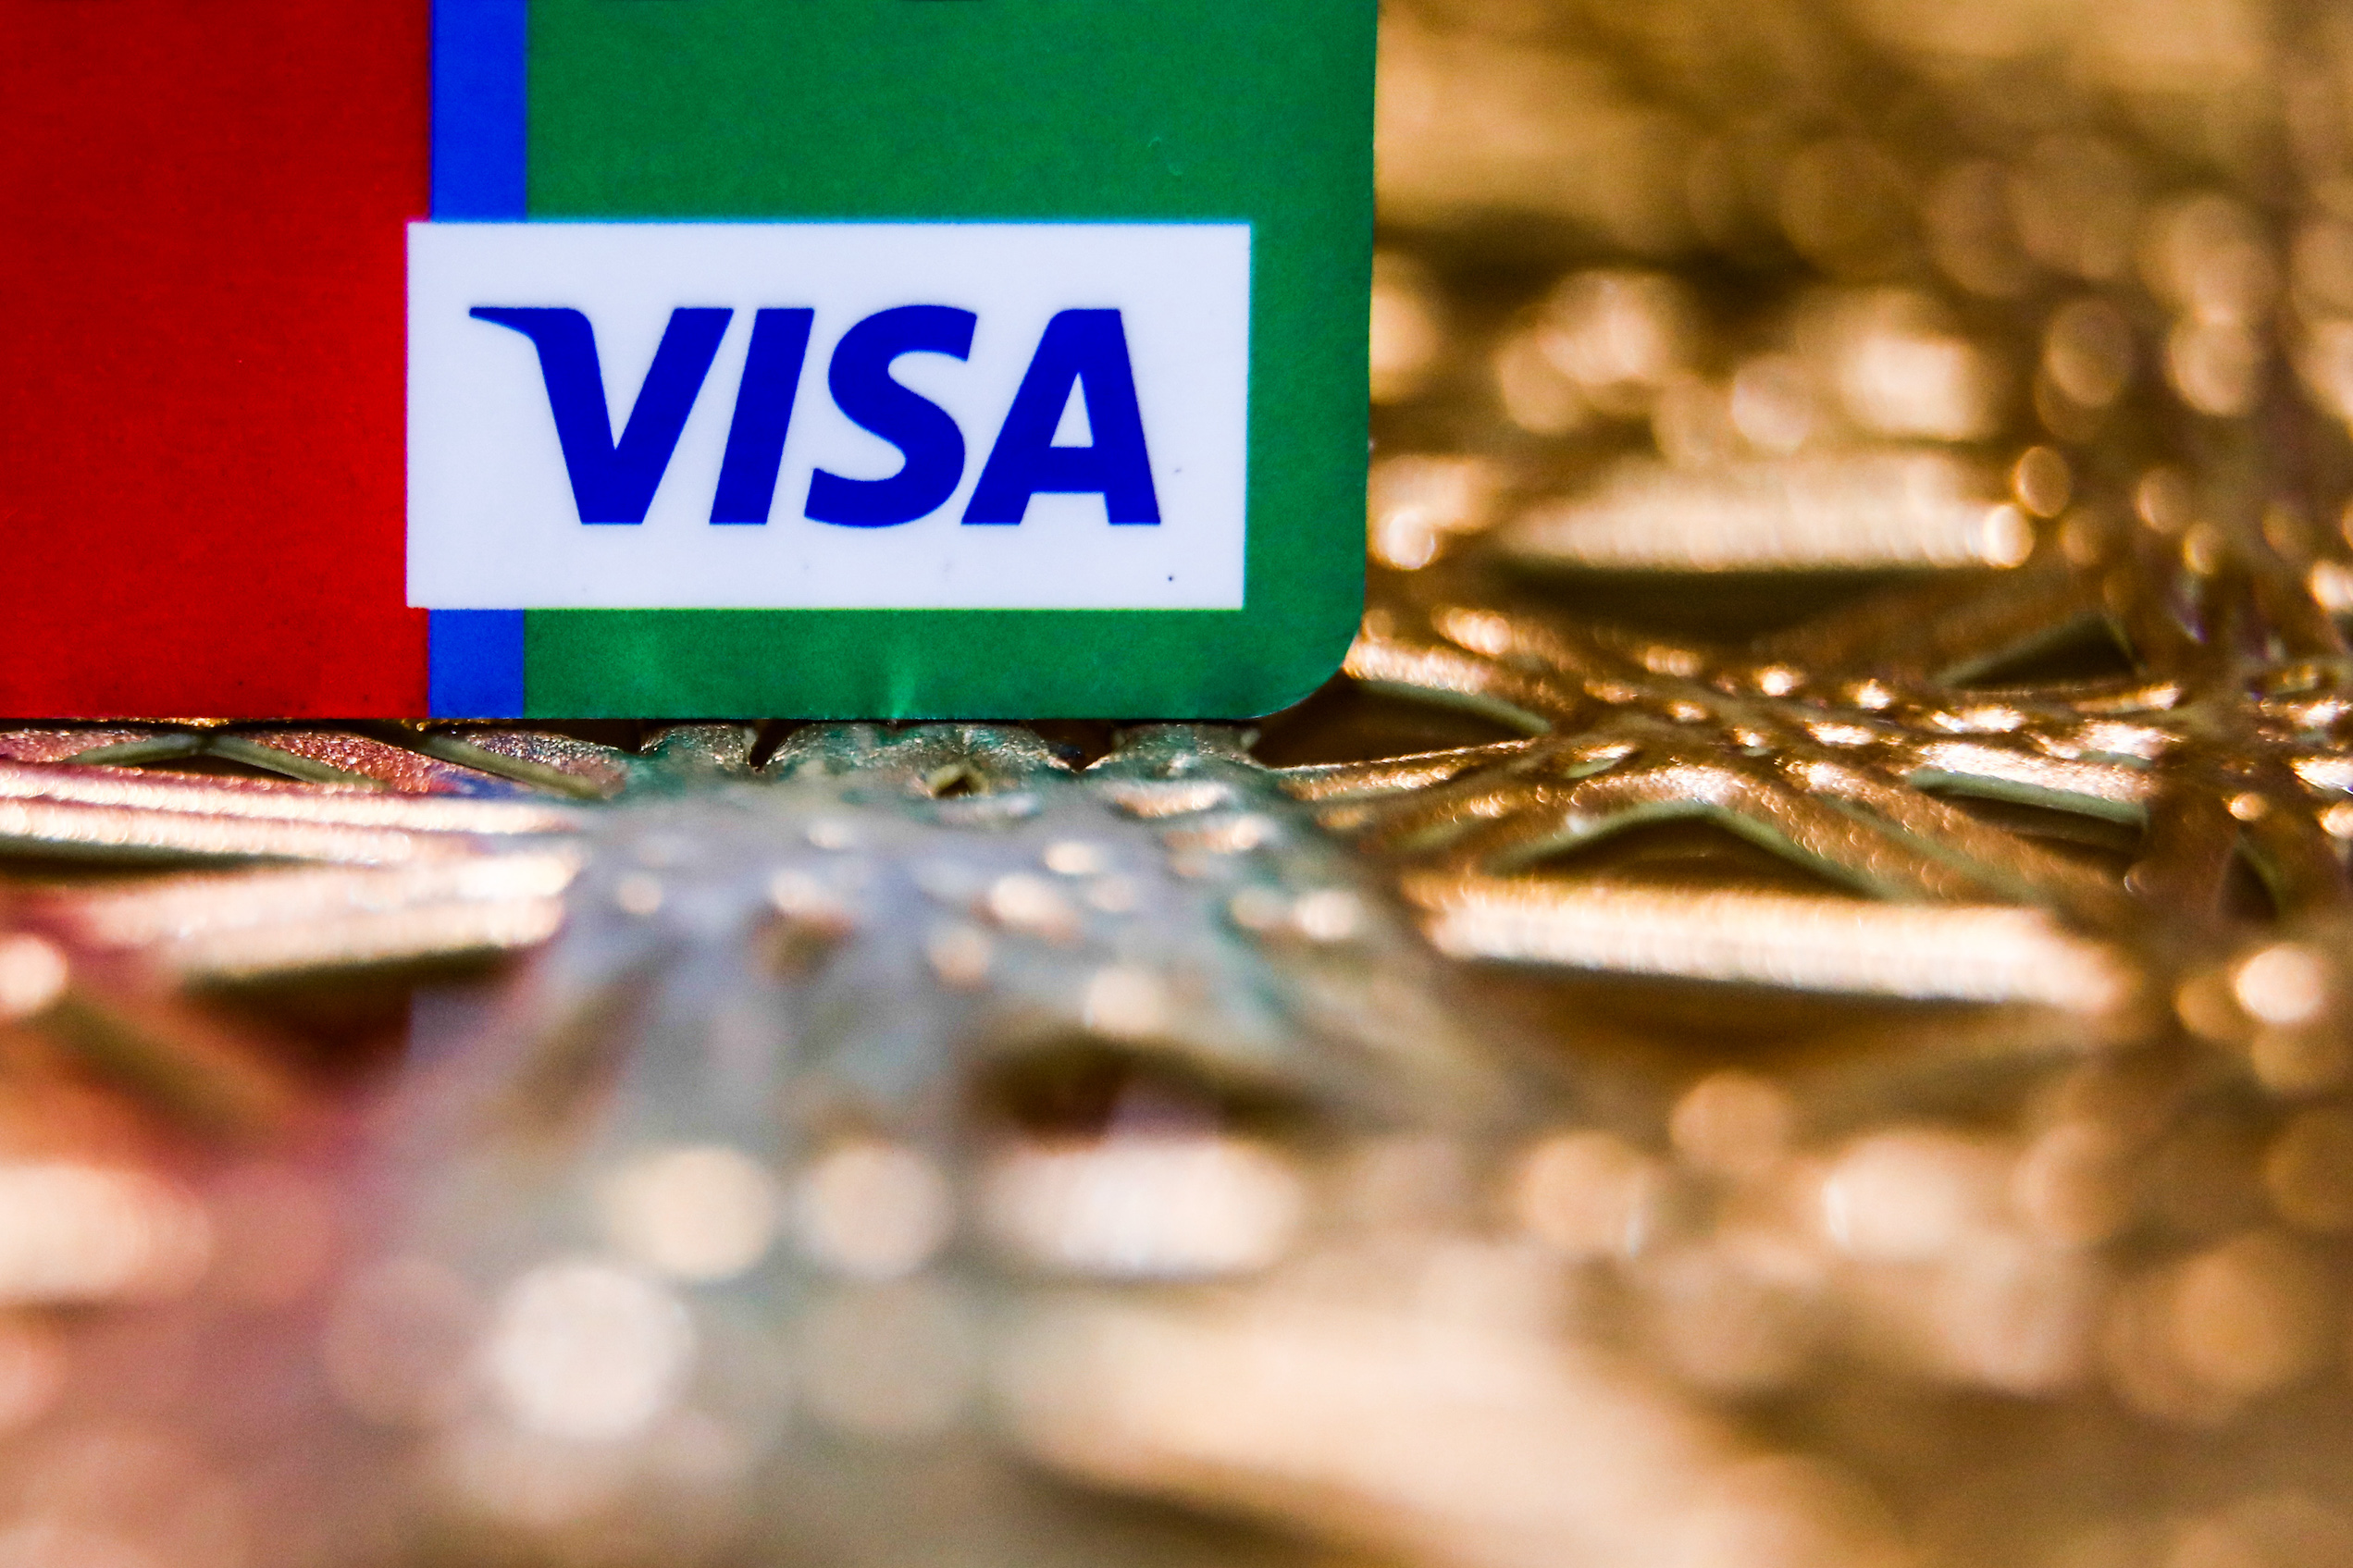 Visa logo is seen on a credit card in this illustration